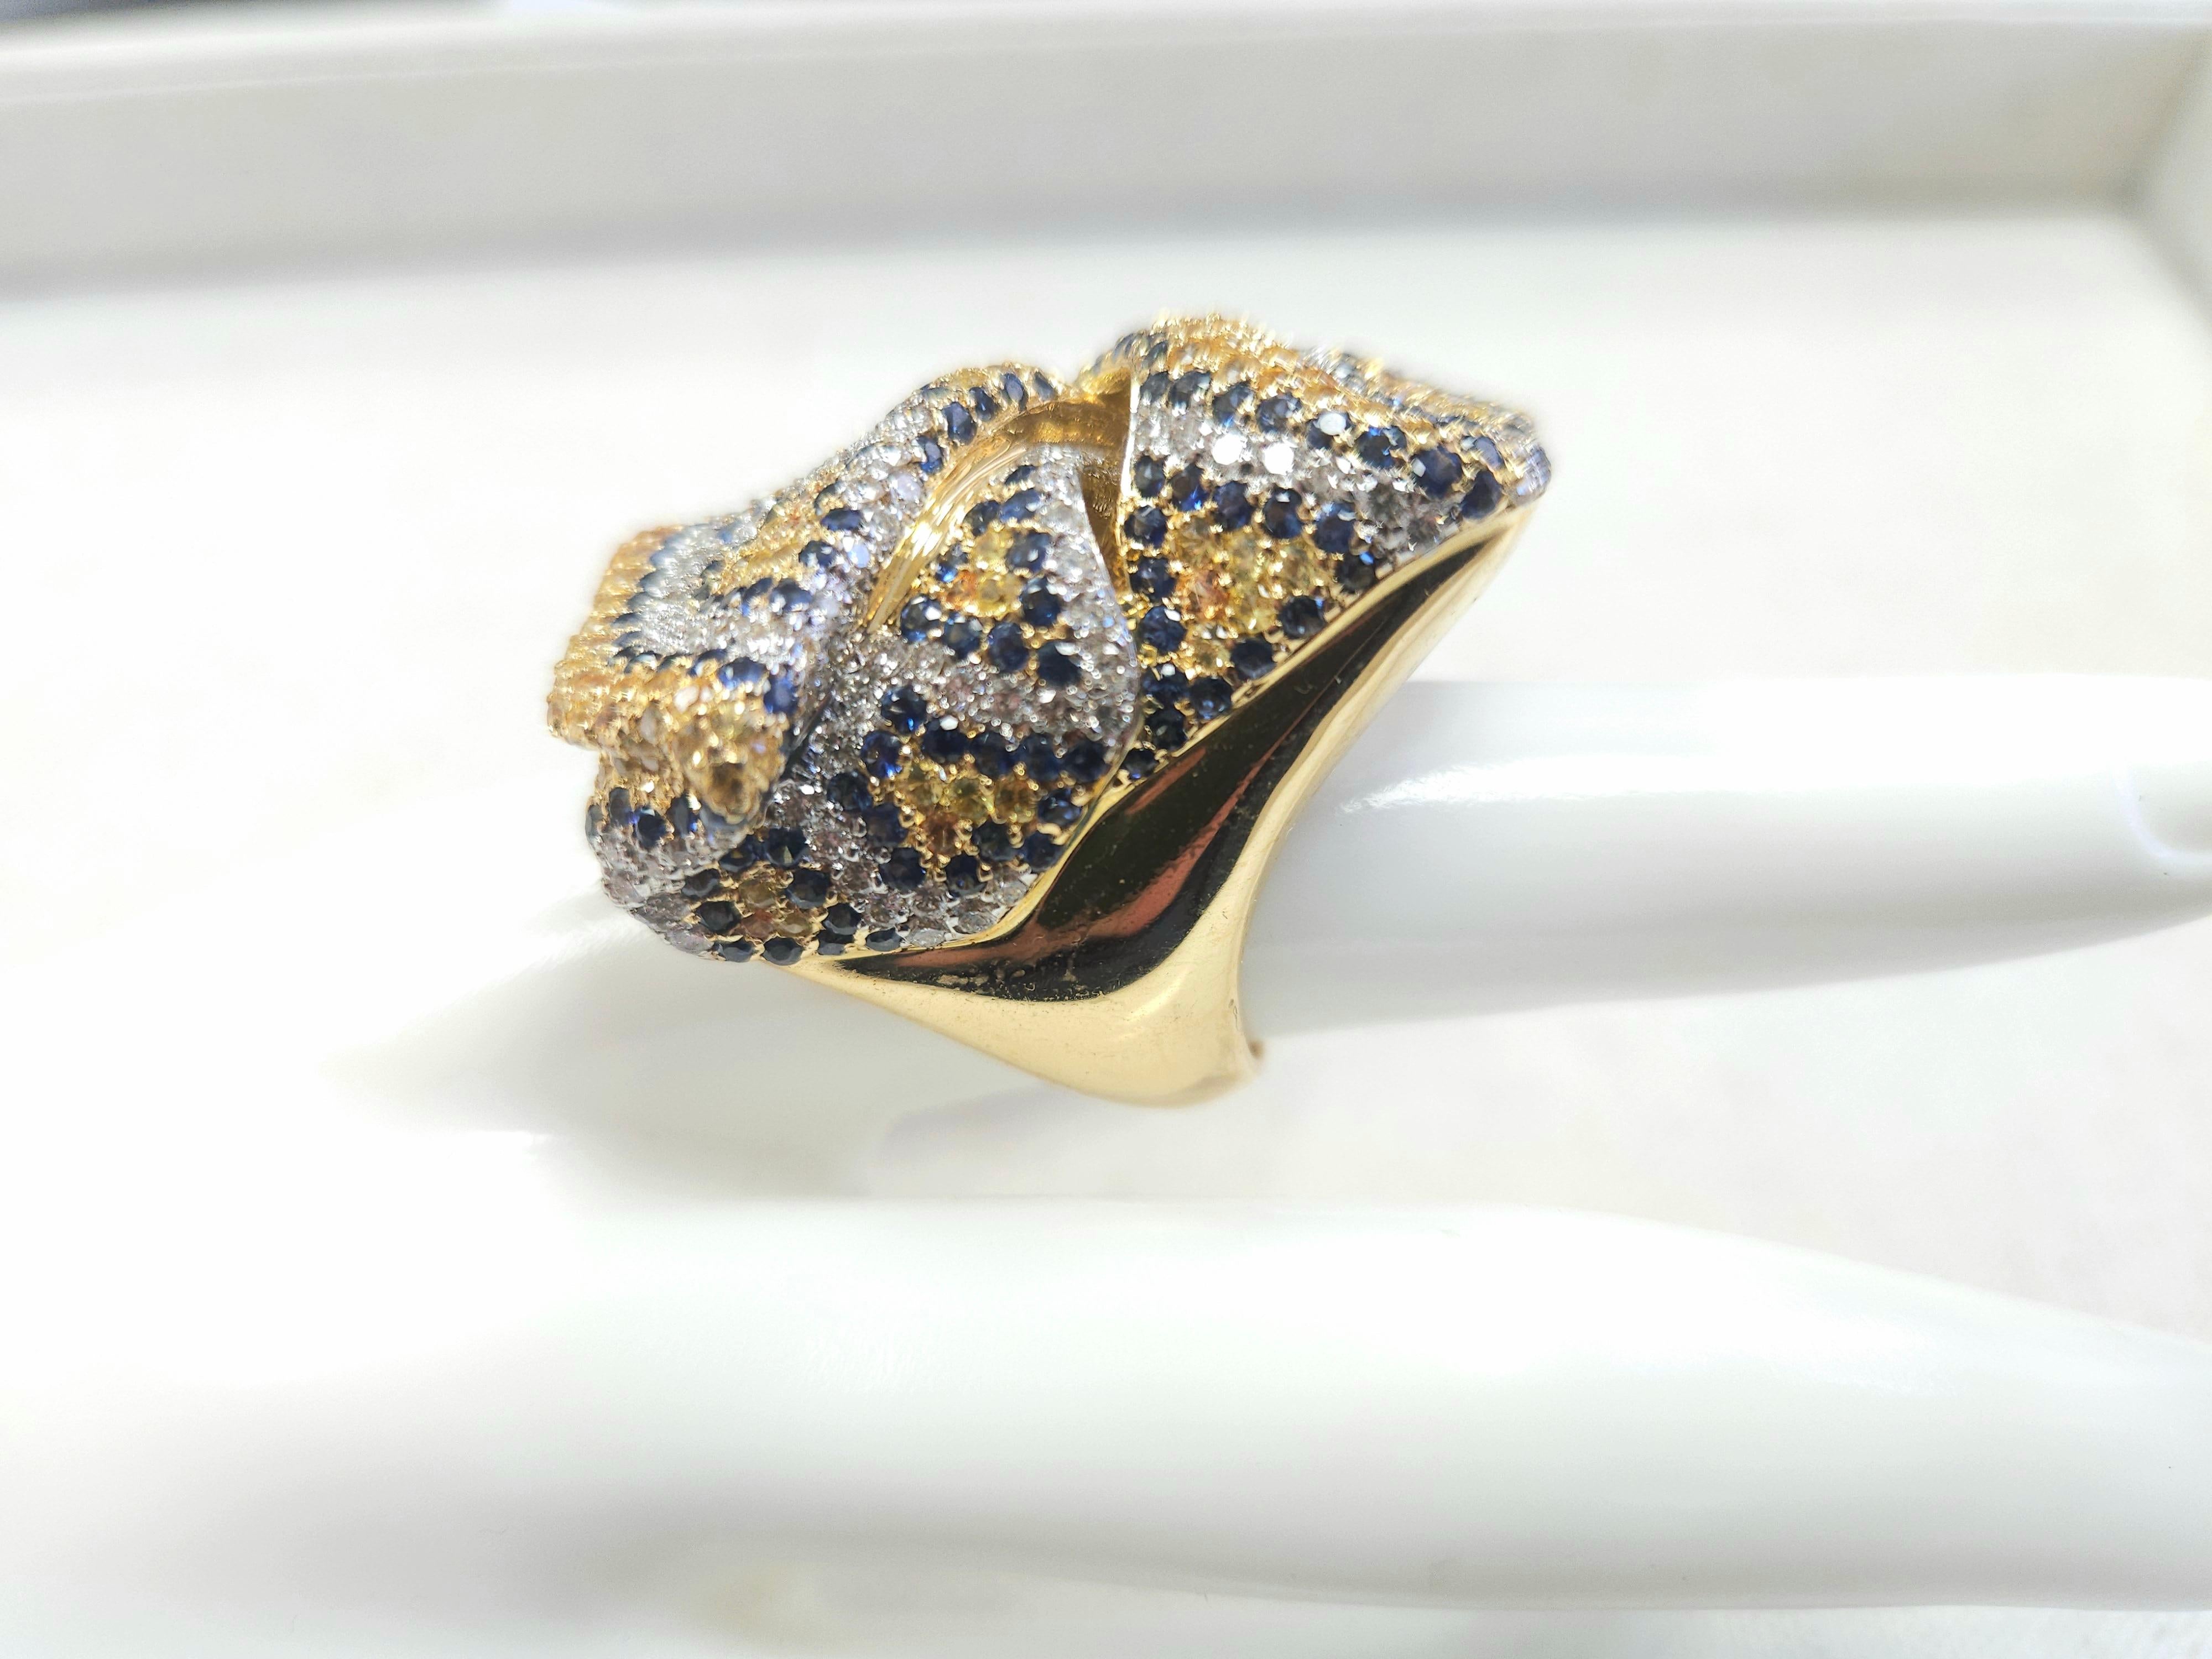 Desginer Hand made Series mulitpe color with Blue and Yellow 18K Yellow Gold ring, size 7.50, Average H-VS, 42.10 grams.

*Free Shipping within U.S*